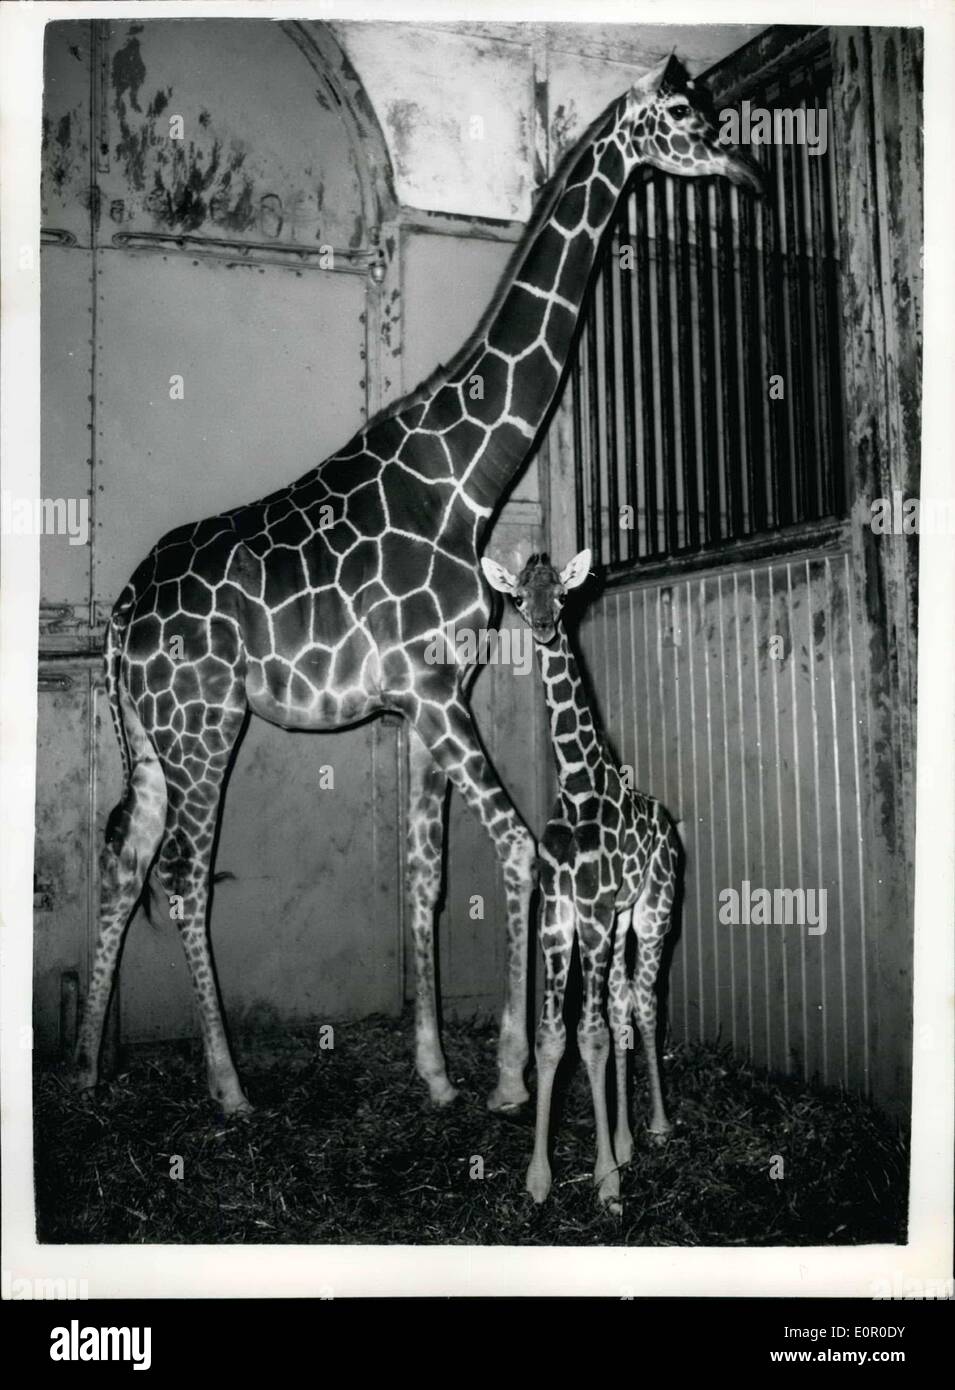 Jul. 21, 1957 - New Baby At The London Zoo: The baby born to ''Grumpy'' and ''Monty'' the London Zoo Giraffes, fourteen days ago - was to be seen by the public for the first time today. Photo shows The baby ''Pat'' - stands beneath mother ''Grumpy'' - at the Zoo this morning. Stock Photo